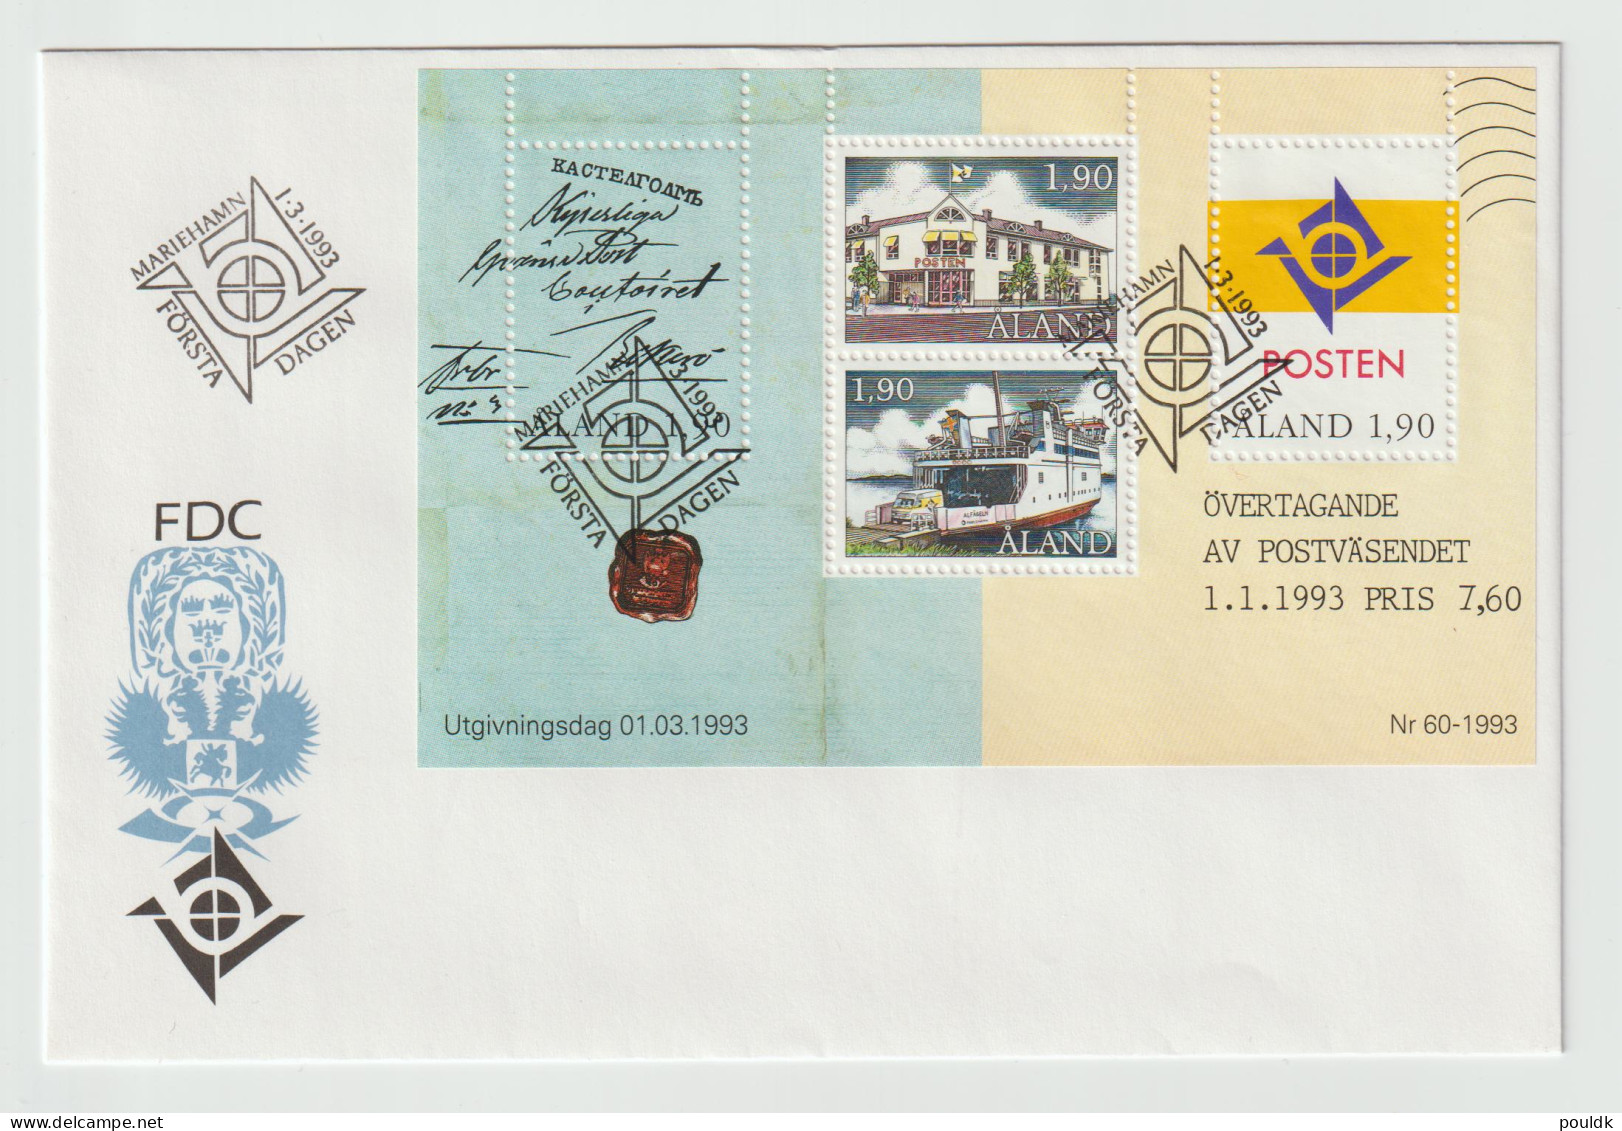 Aland FDC 1993 The Post Souvenir Sheet. Postal Weight Approx 0,04 Kg. Please Read Sales Conditions Under Image Of - Ålandinseln